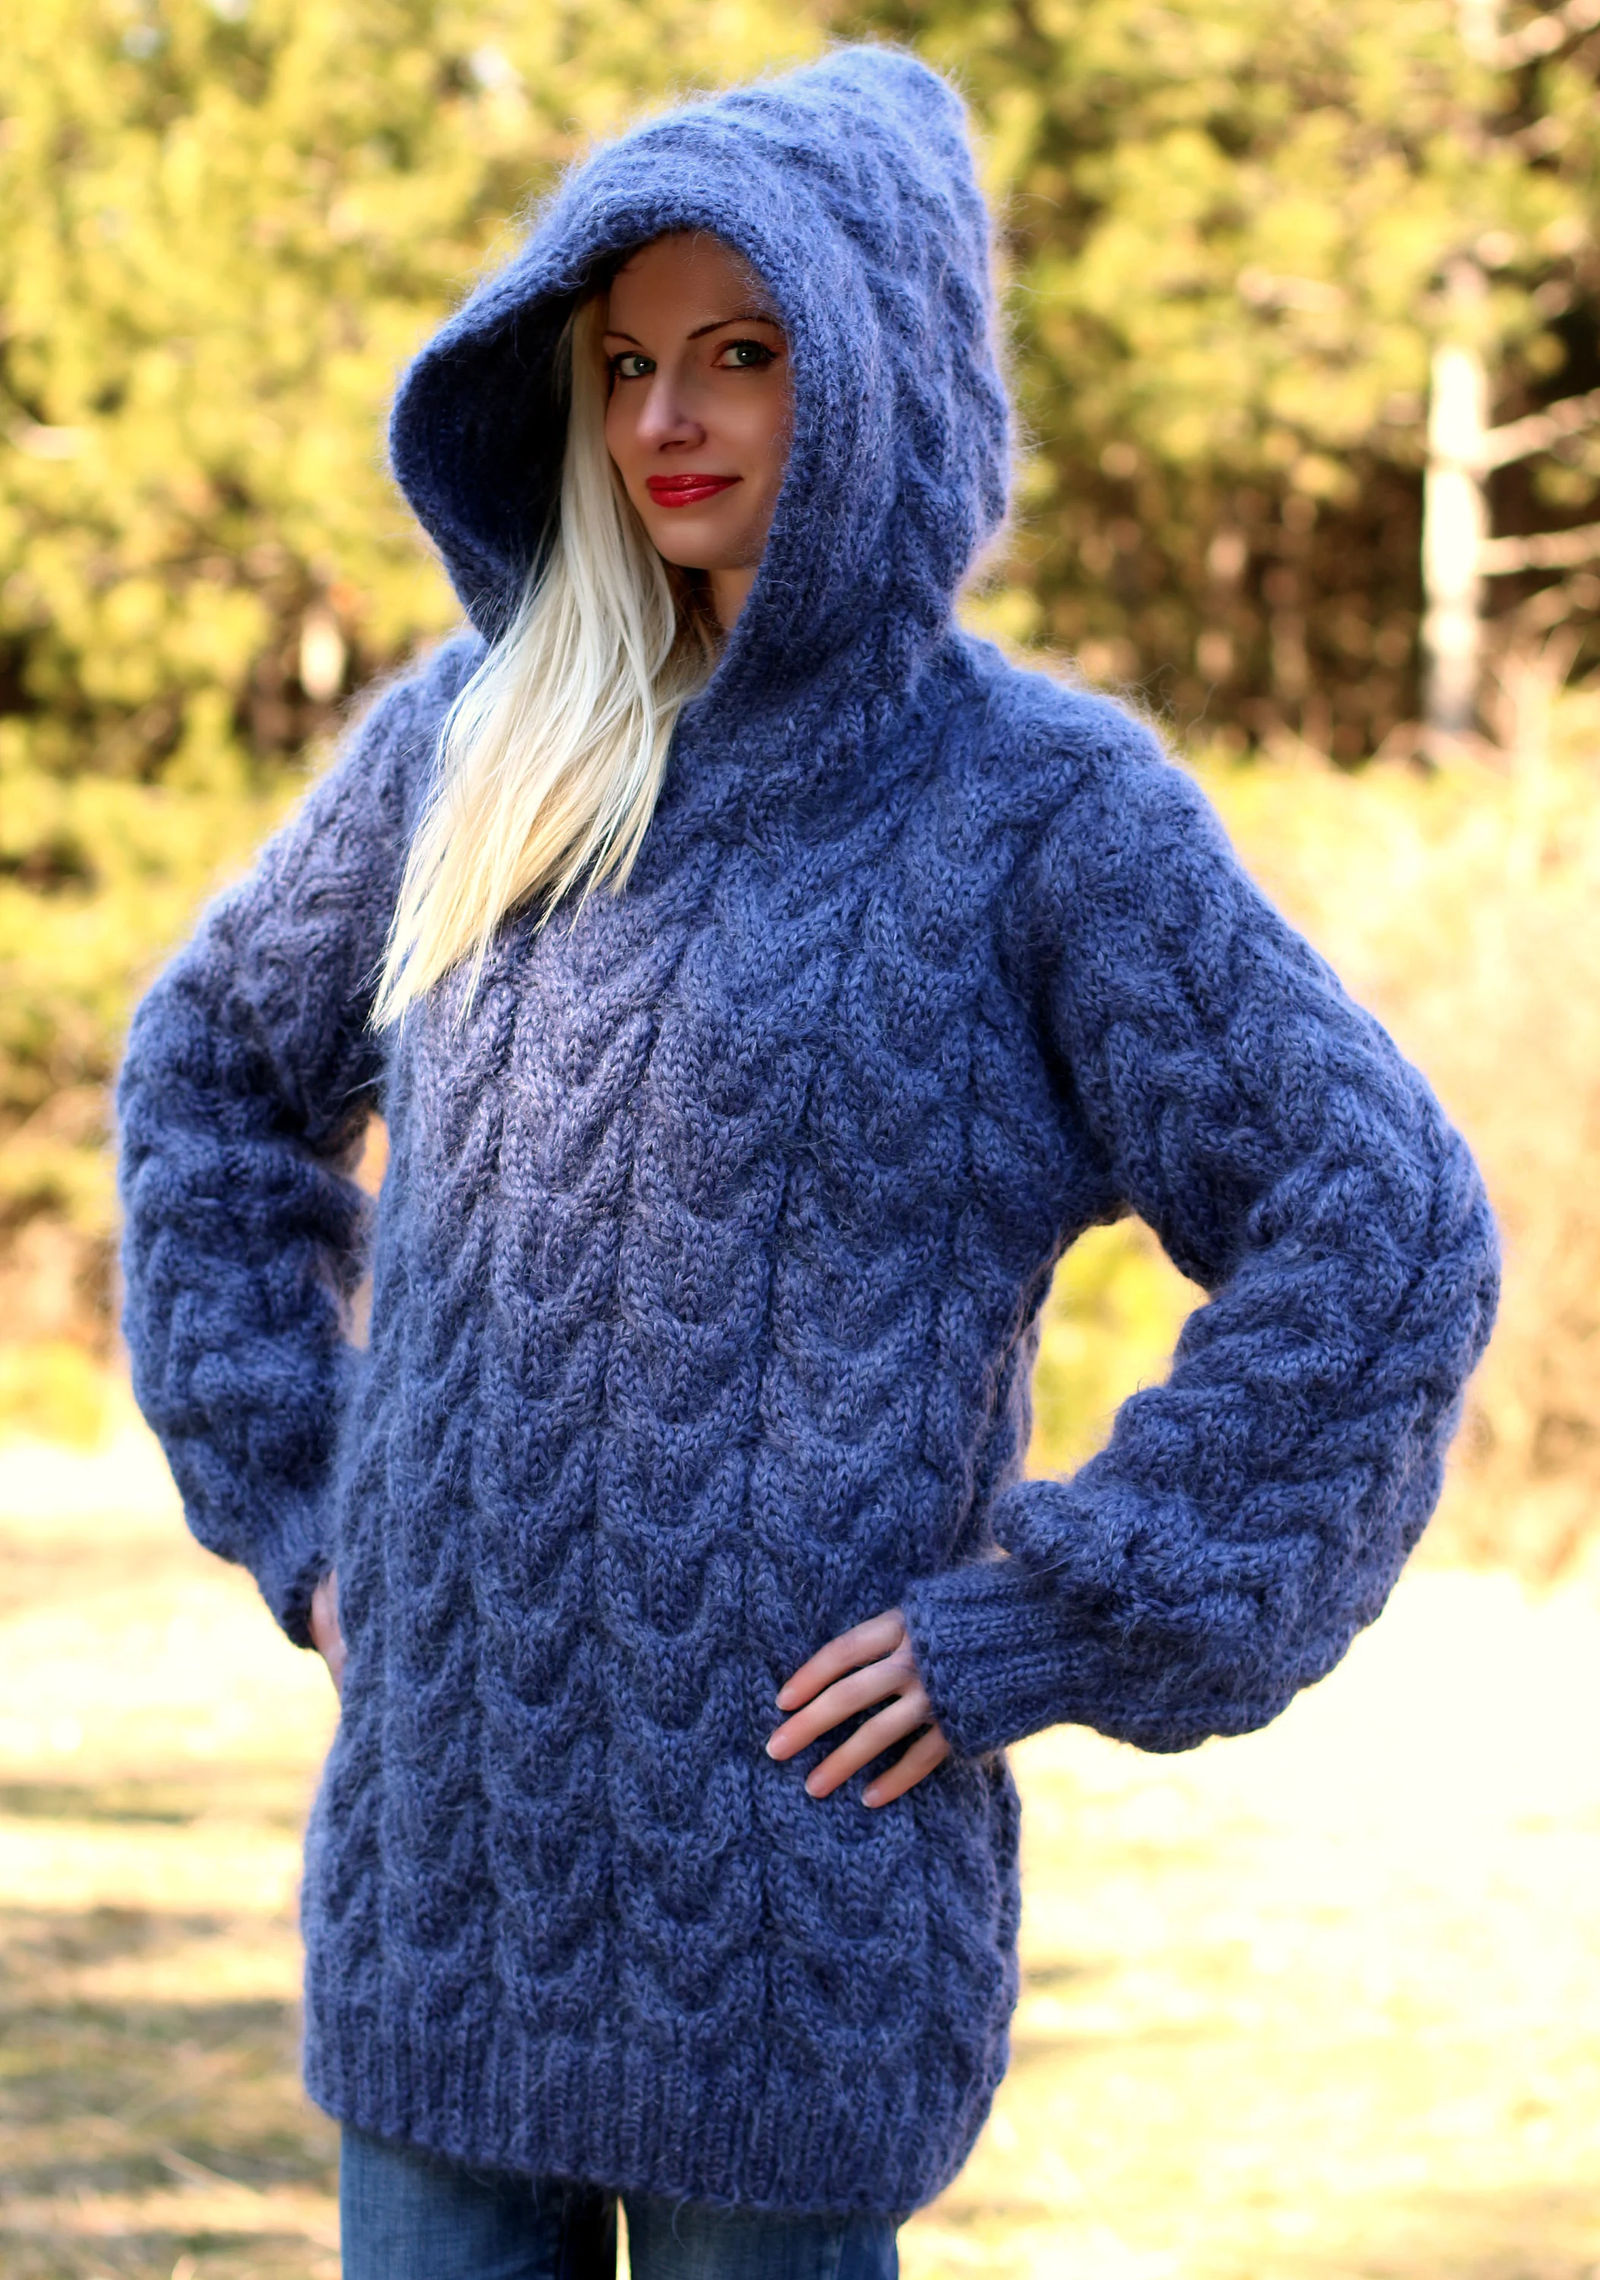 These 24 Cozy Knit Sweaters Will Make You Feel Snug As A Bug This Autumn In  Canada - Narcity